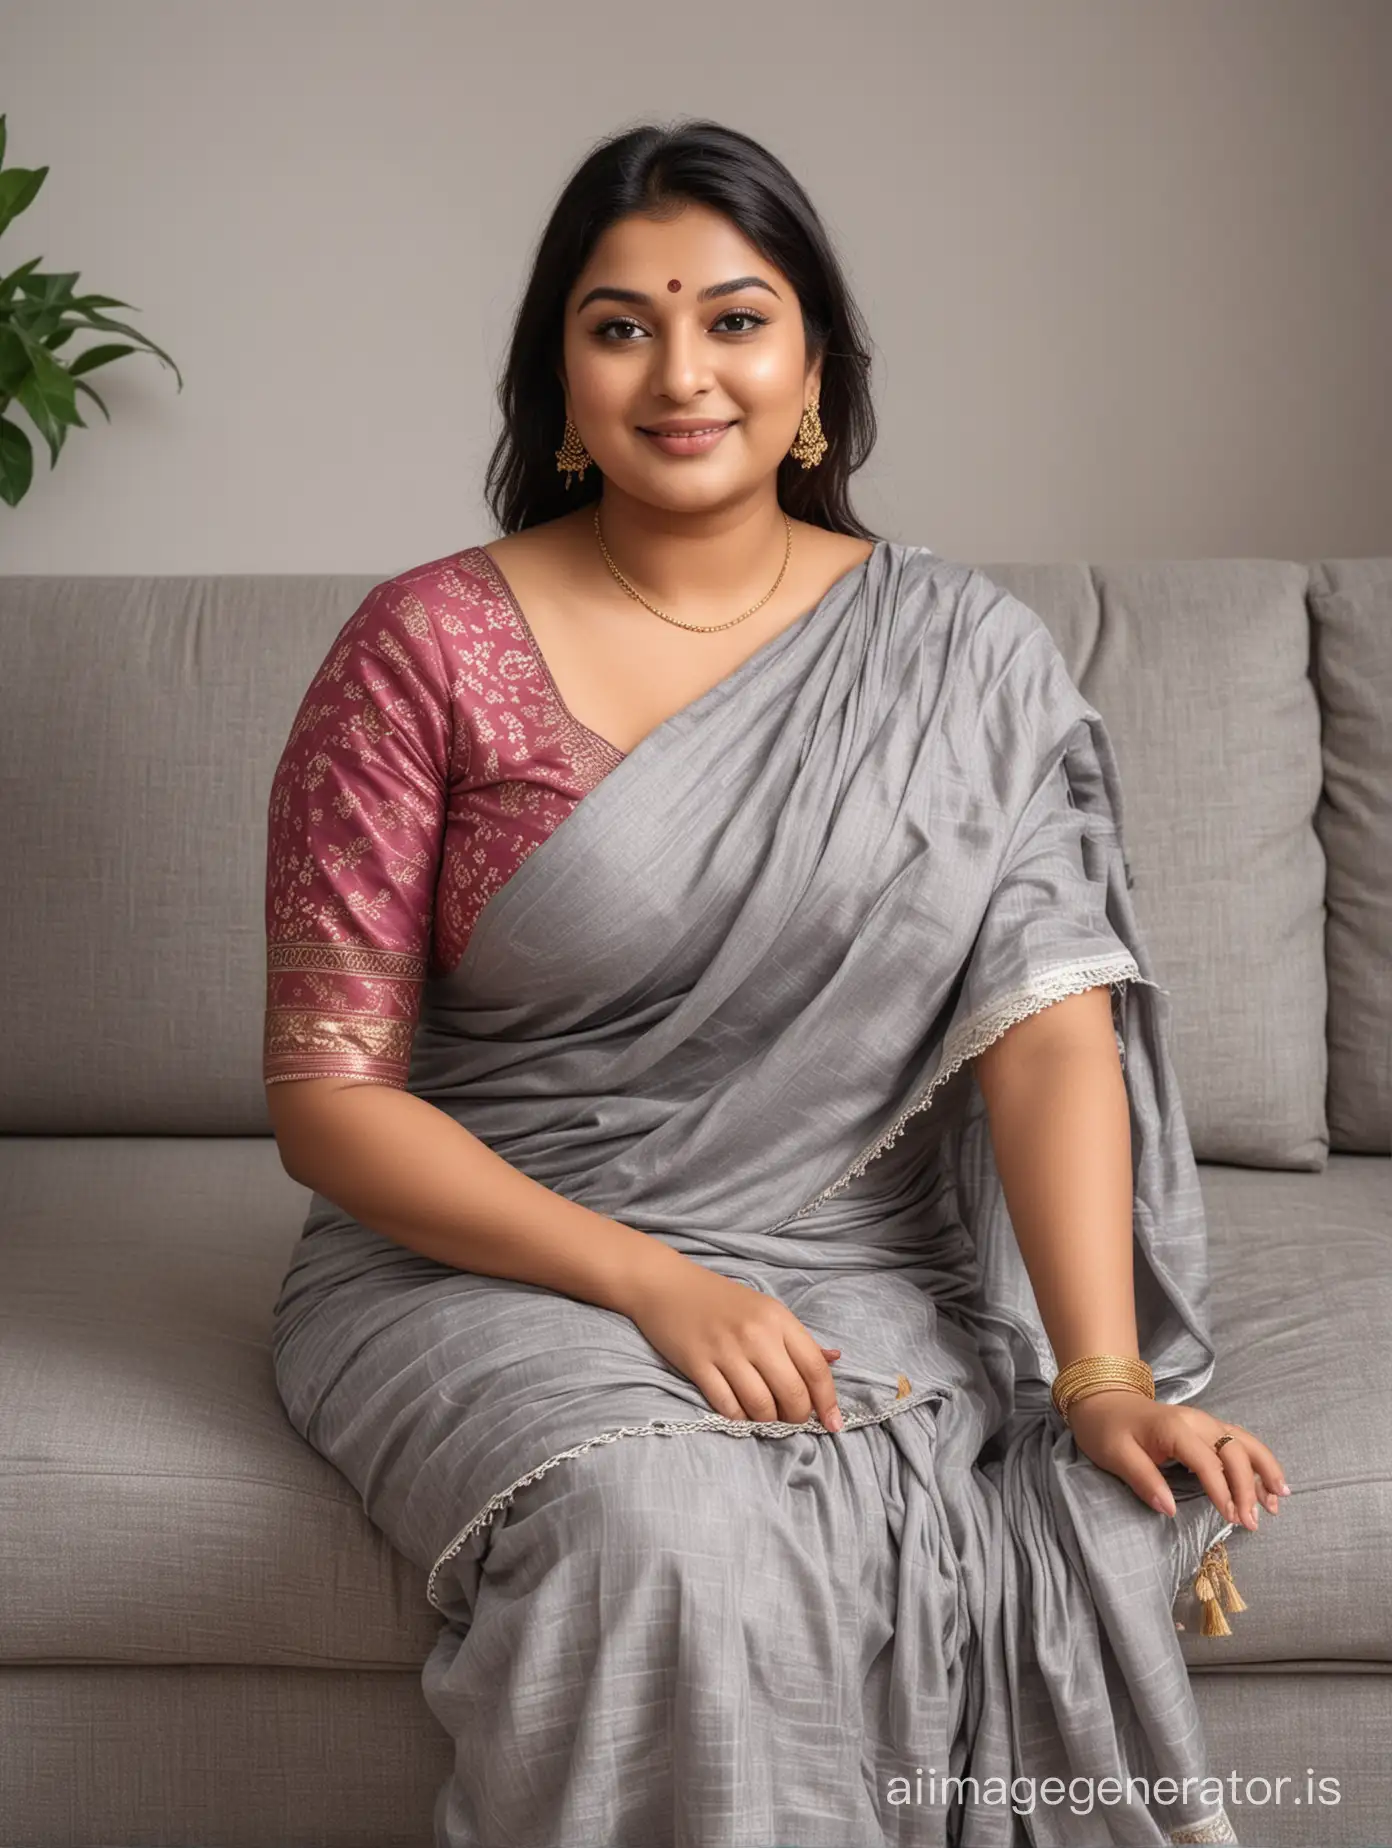 Relaxed-Indian-Plus-Size-Women-in-Casual-Saree-Lounge-on-Sofa